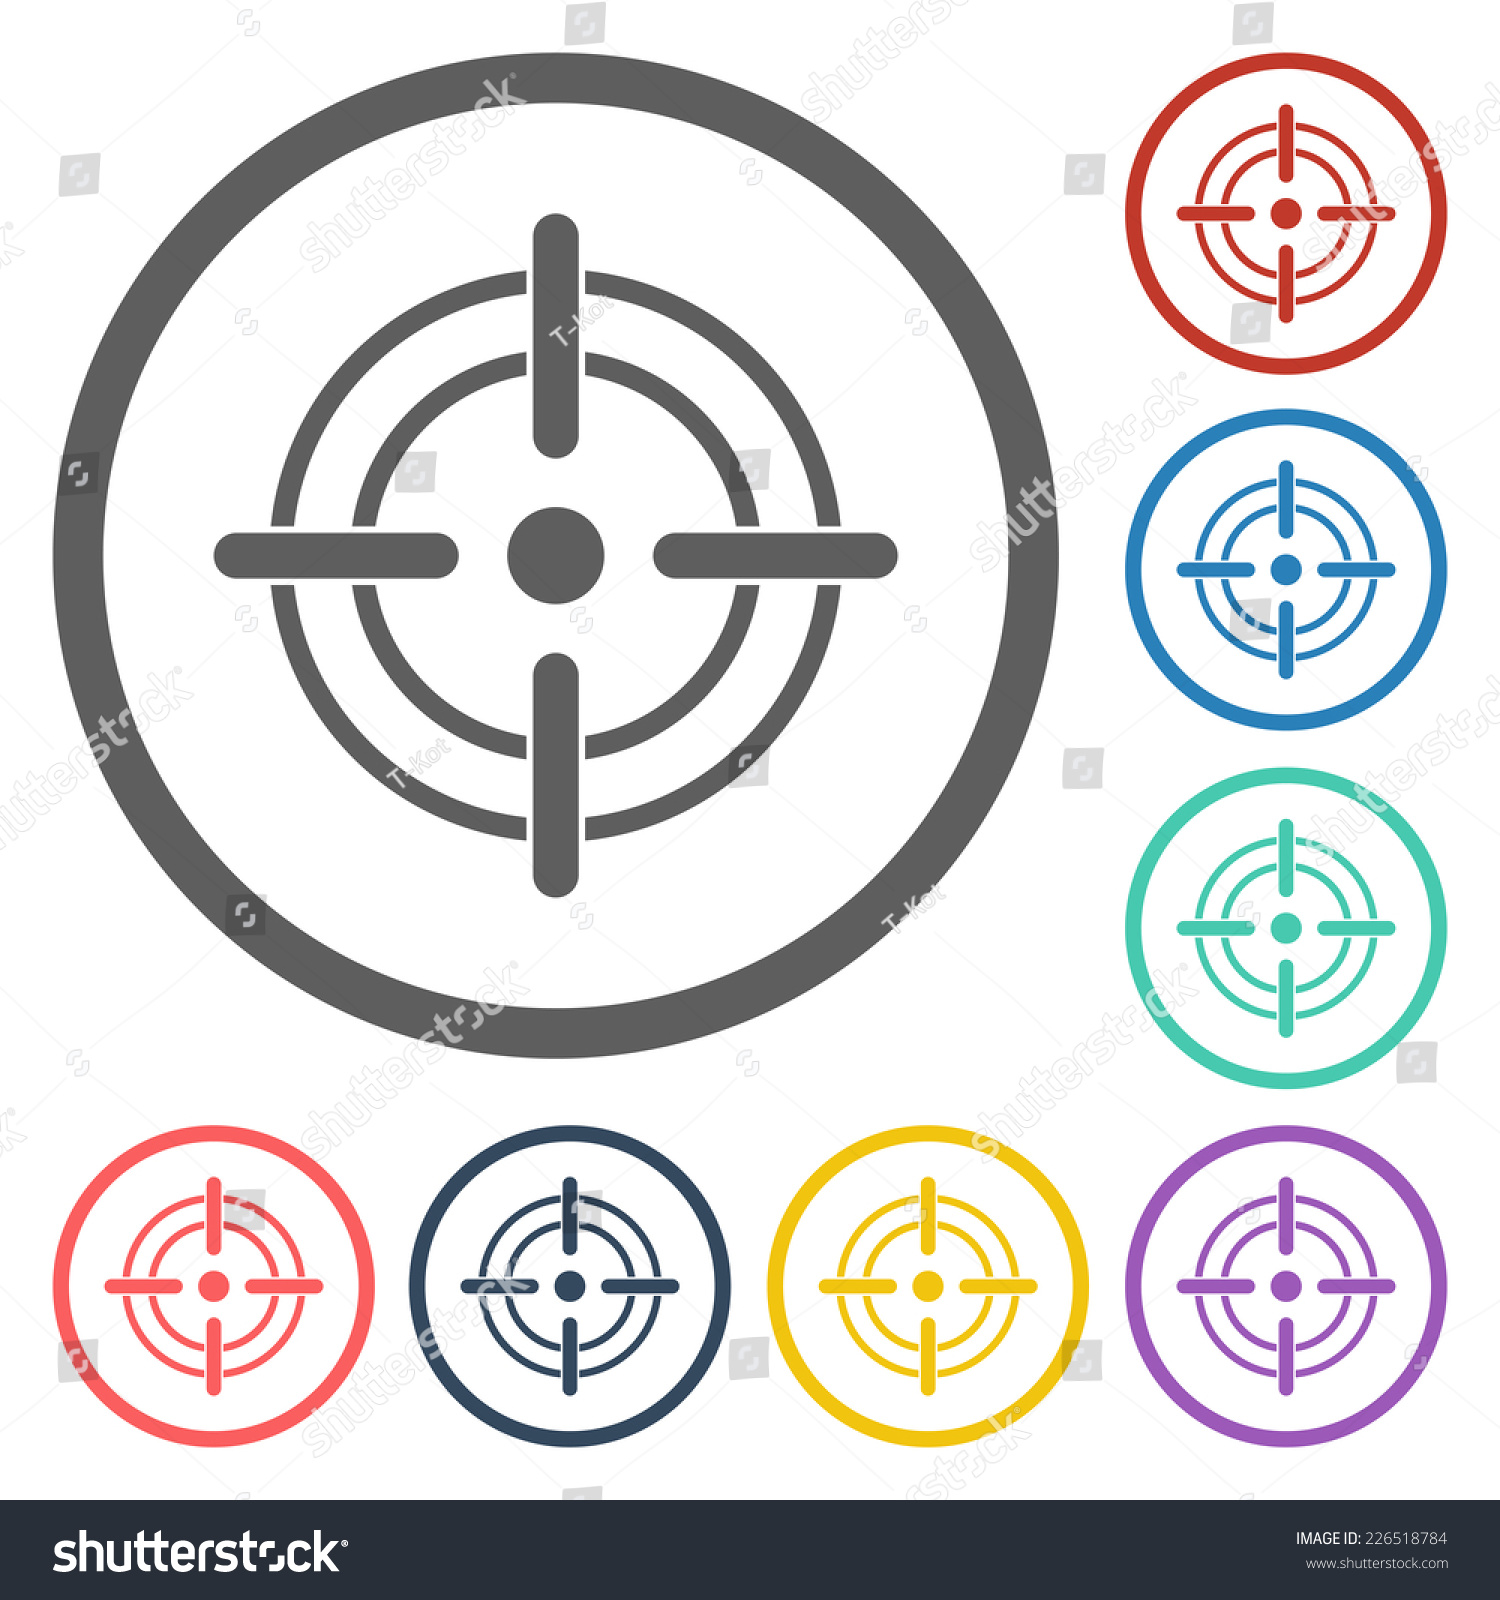 Crosshairs Icon Stock Vector Royalty Free Shutterstock